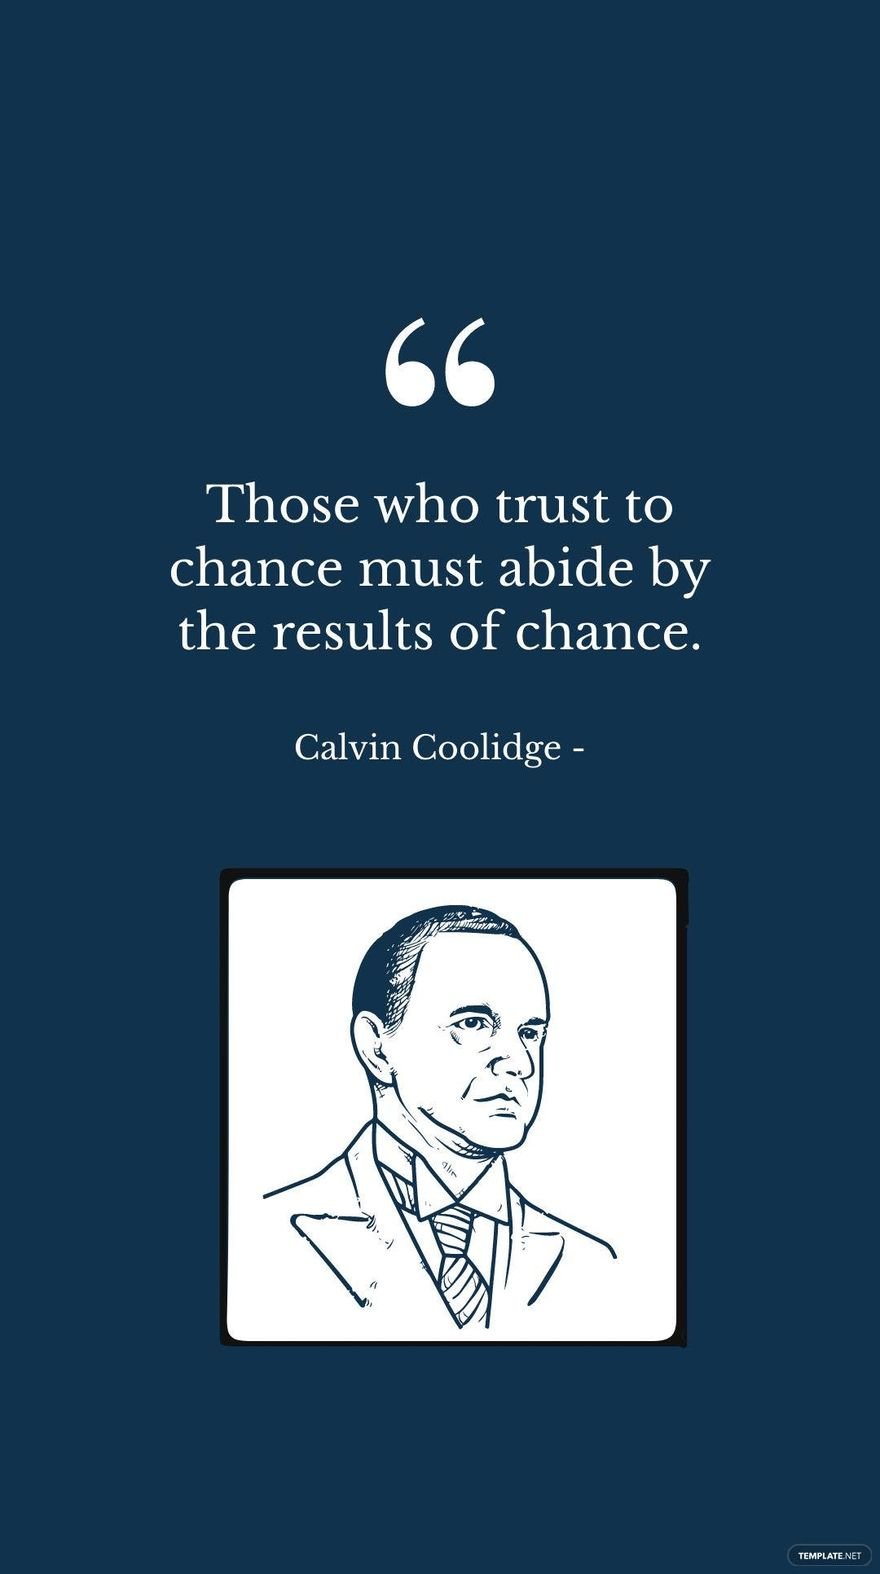 Free Calvin Coolidge - Those who trust to chance must abide by the results of chance. in JPG